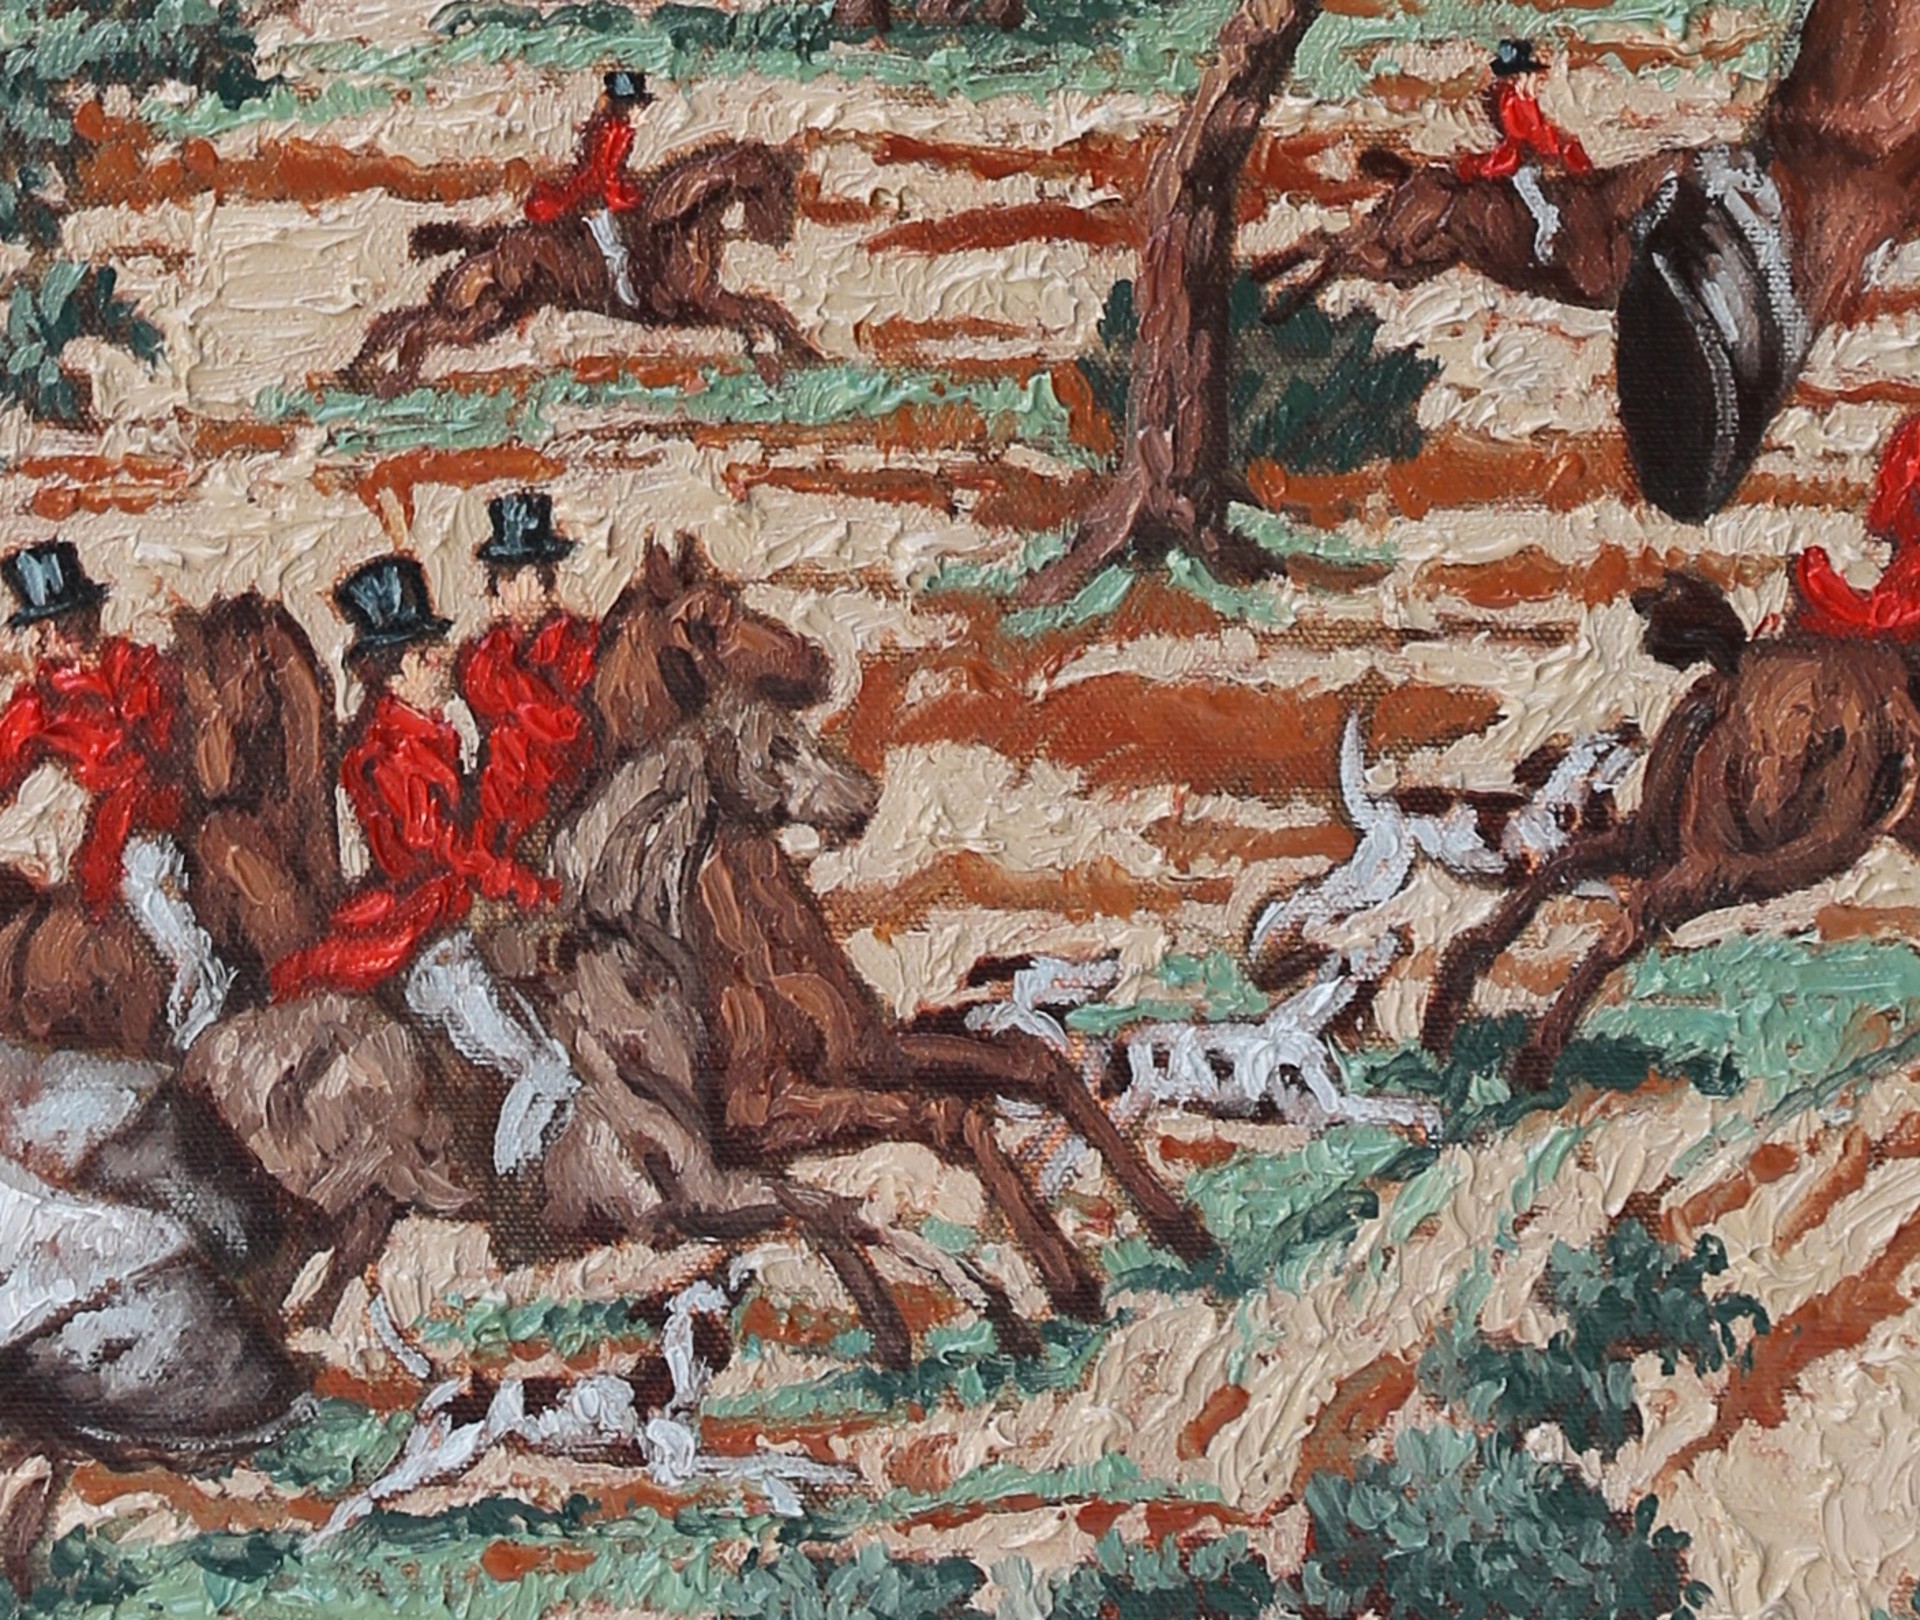 Feral Horse Galloping After a Fox by Carlos Gamez de Francisco